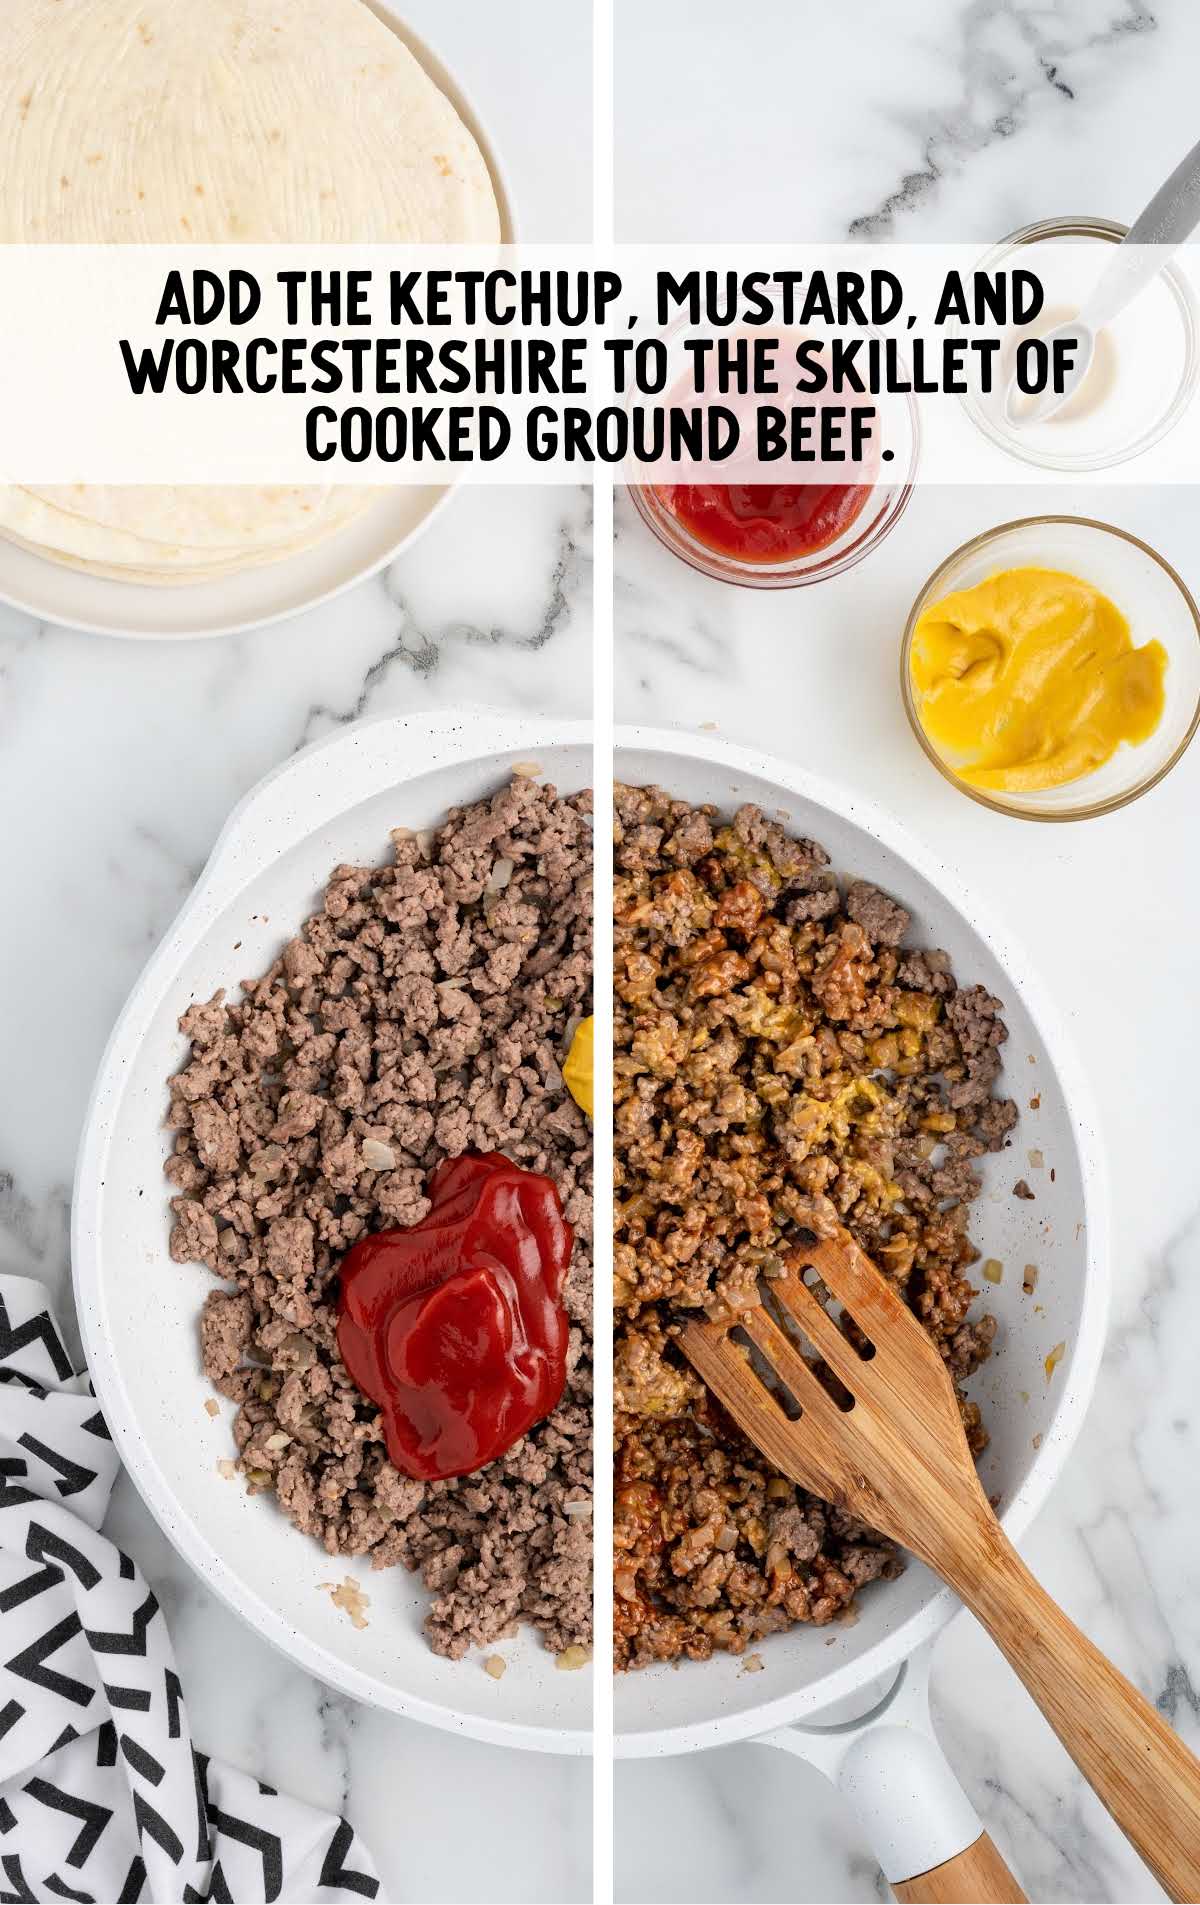 ketchup, yellow mustard, and Worcestershire sauce added to the skillet of ground beef